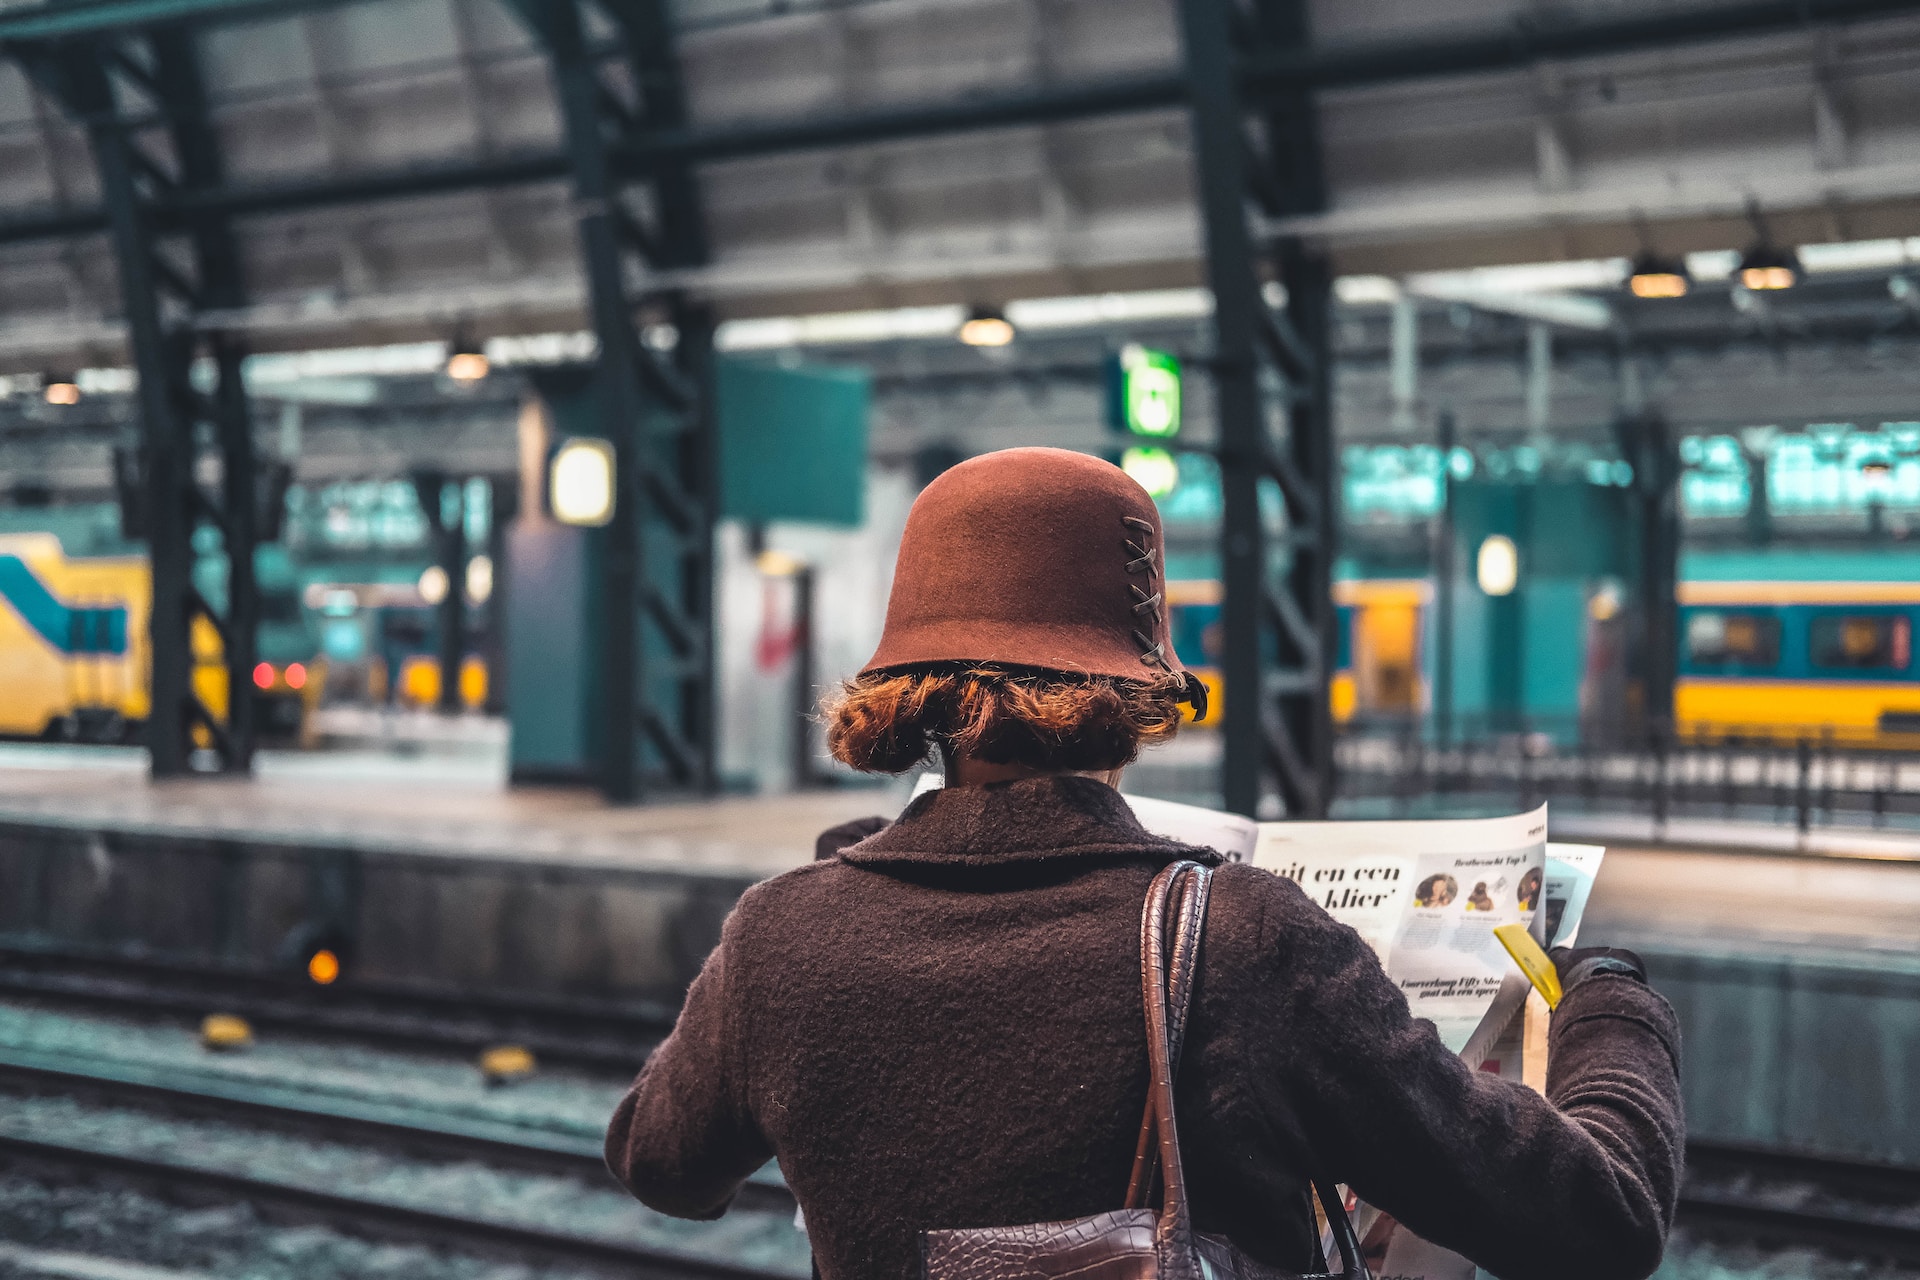 A lady in brown hat and coat standing near the tracks and reading the newspaper in a train station